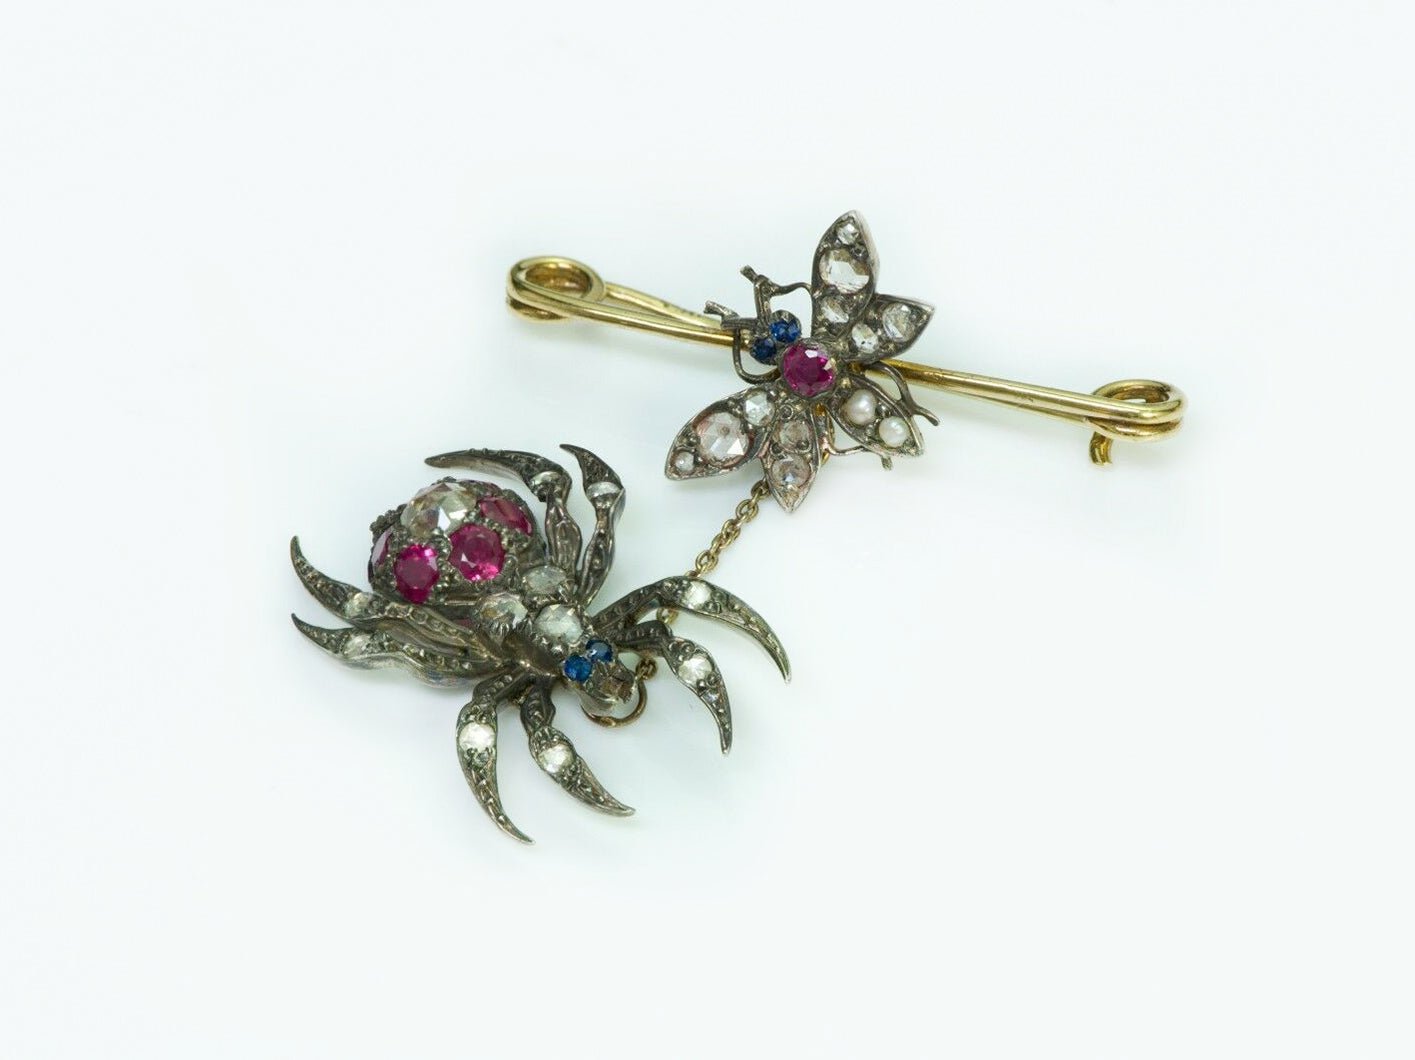 Antique Spider & Fly Yellow Gold Rose Cut Diamond Brooch Pin - DSF Antique Jewelry